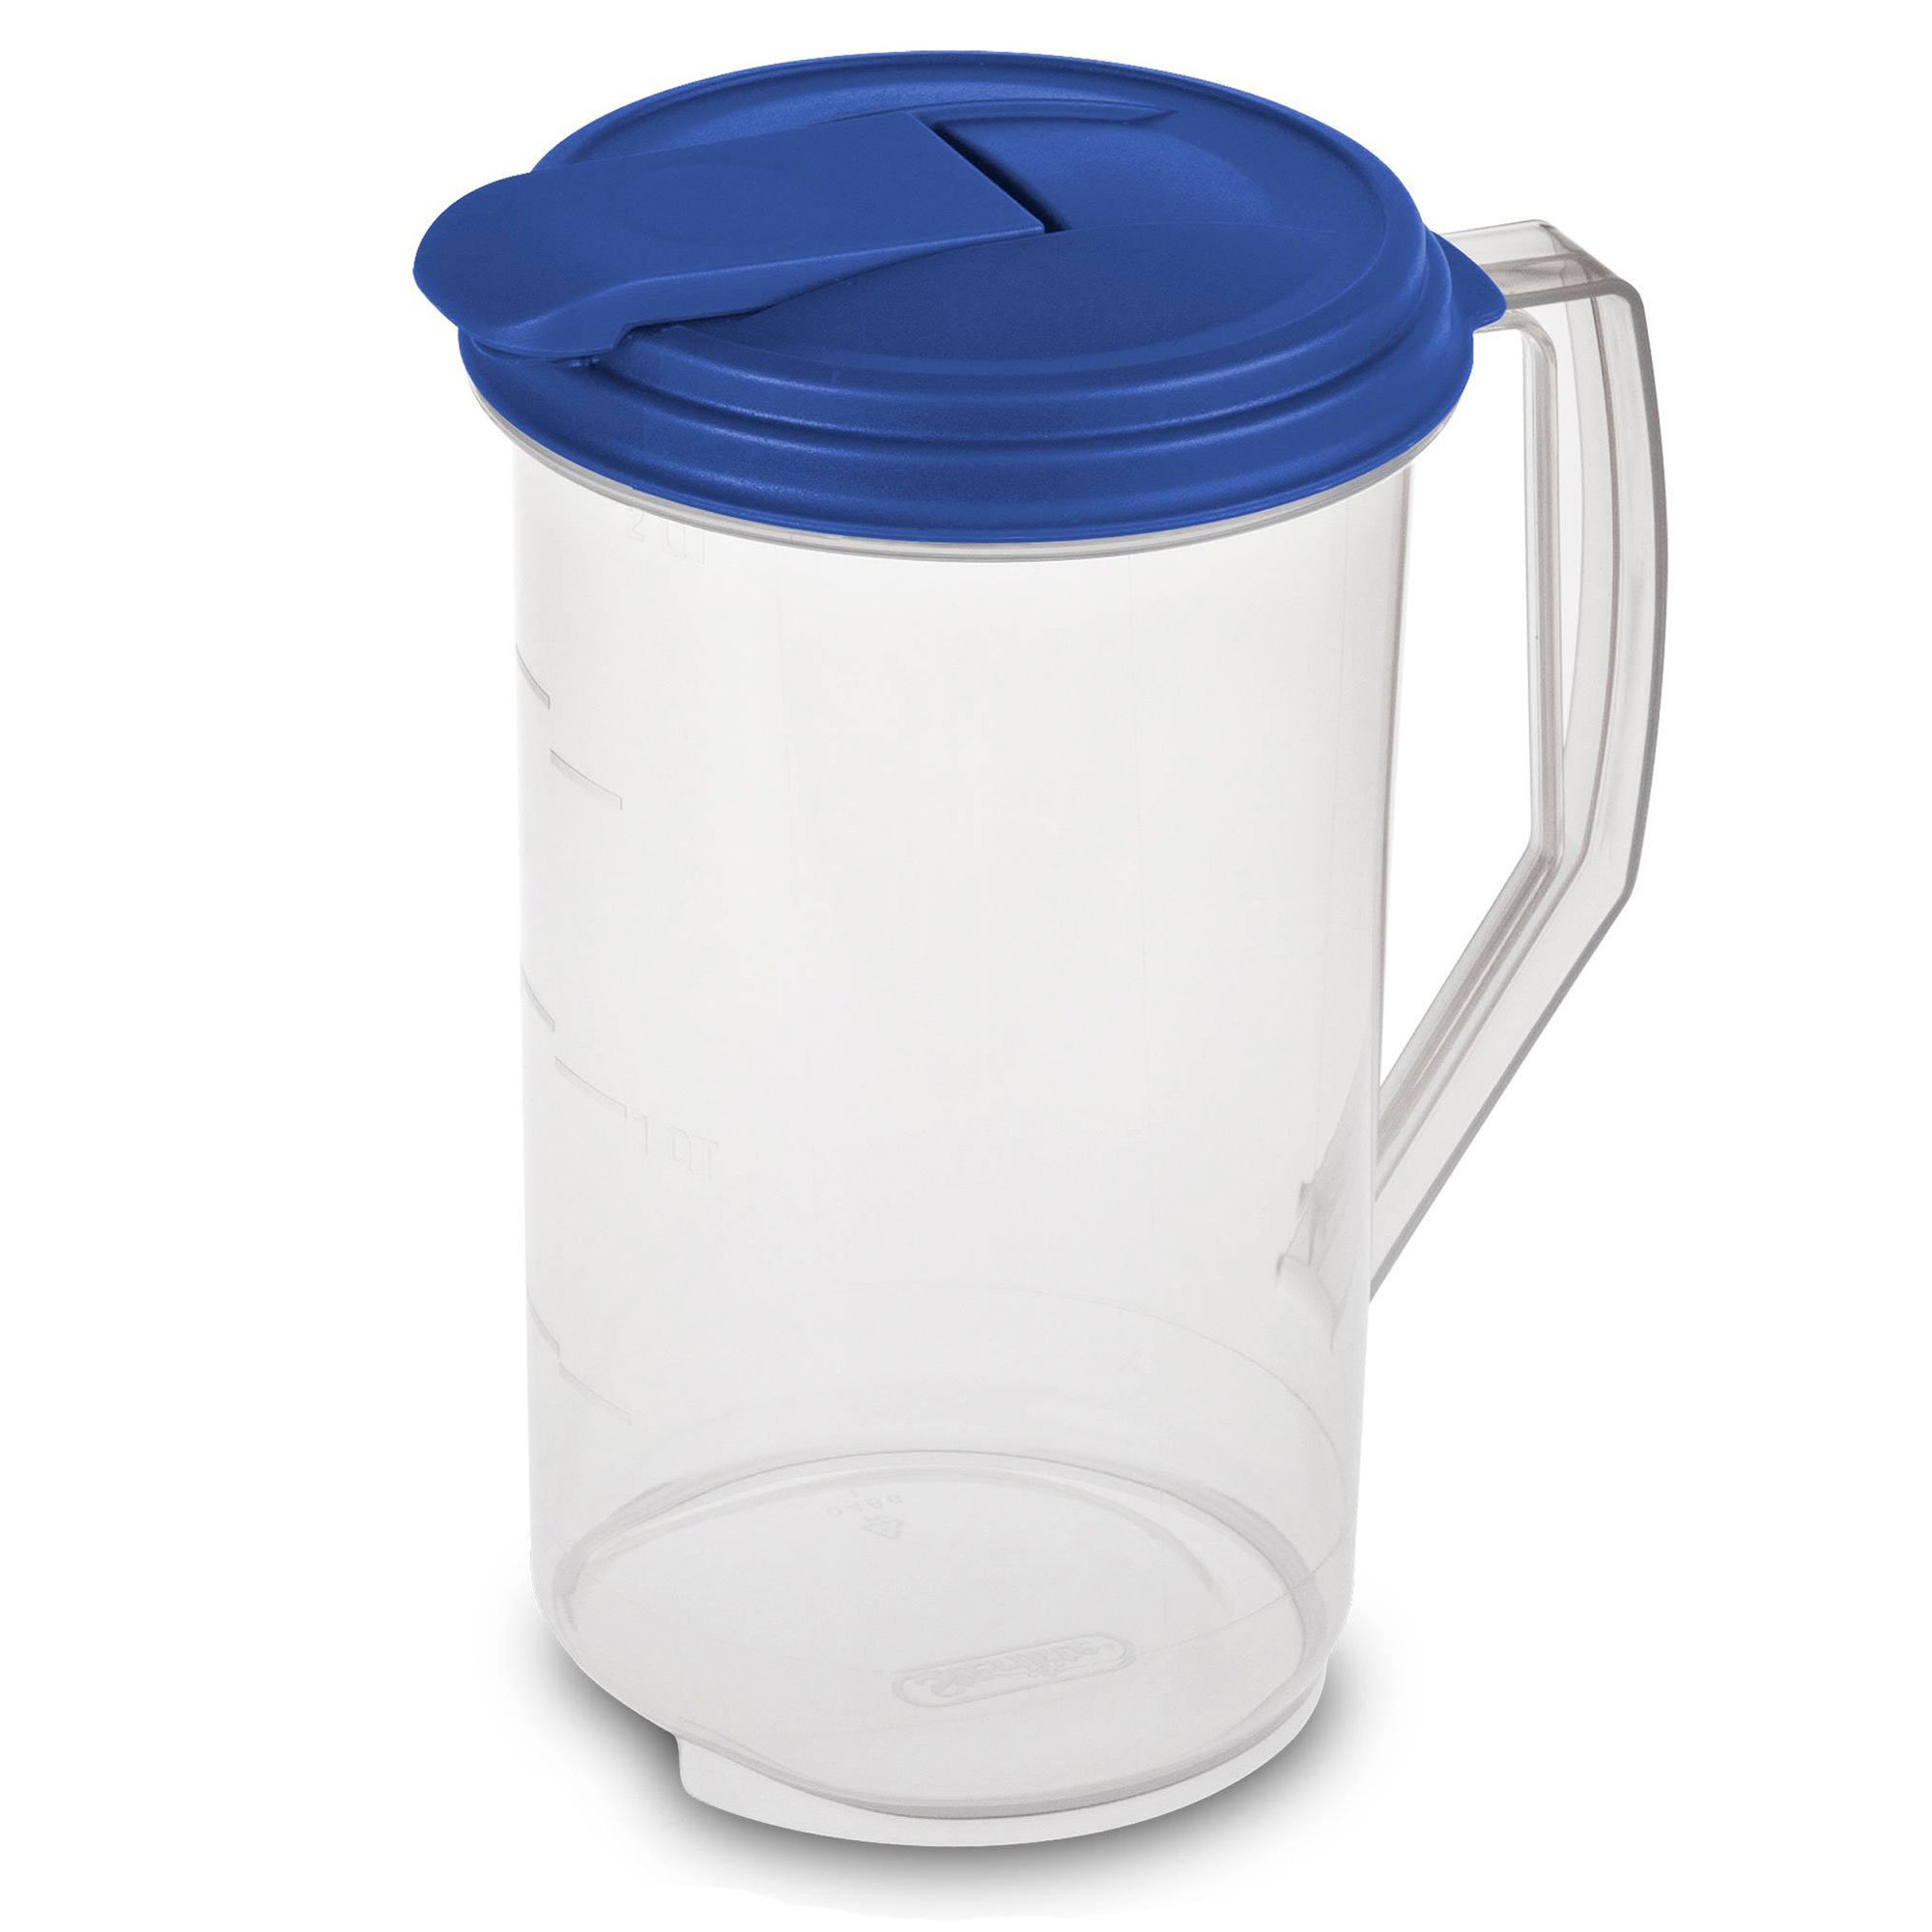 2 Pack Heavy Duty 1 Gallon/4.5 Liter Round Clear Plastic Pitcher Jug with Lid See Through Base & Handle for Water Iced Tea Beverages-10 x 7 inch